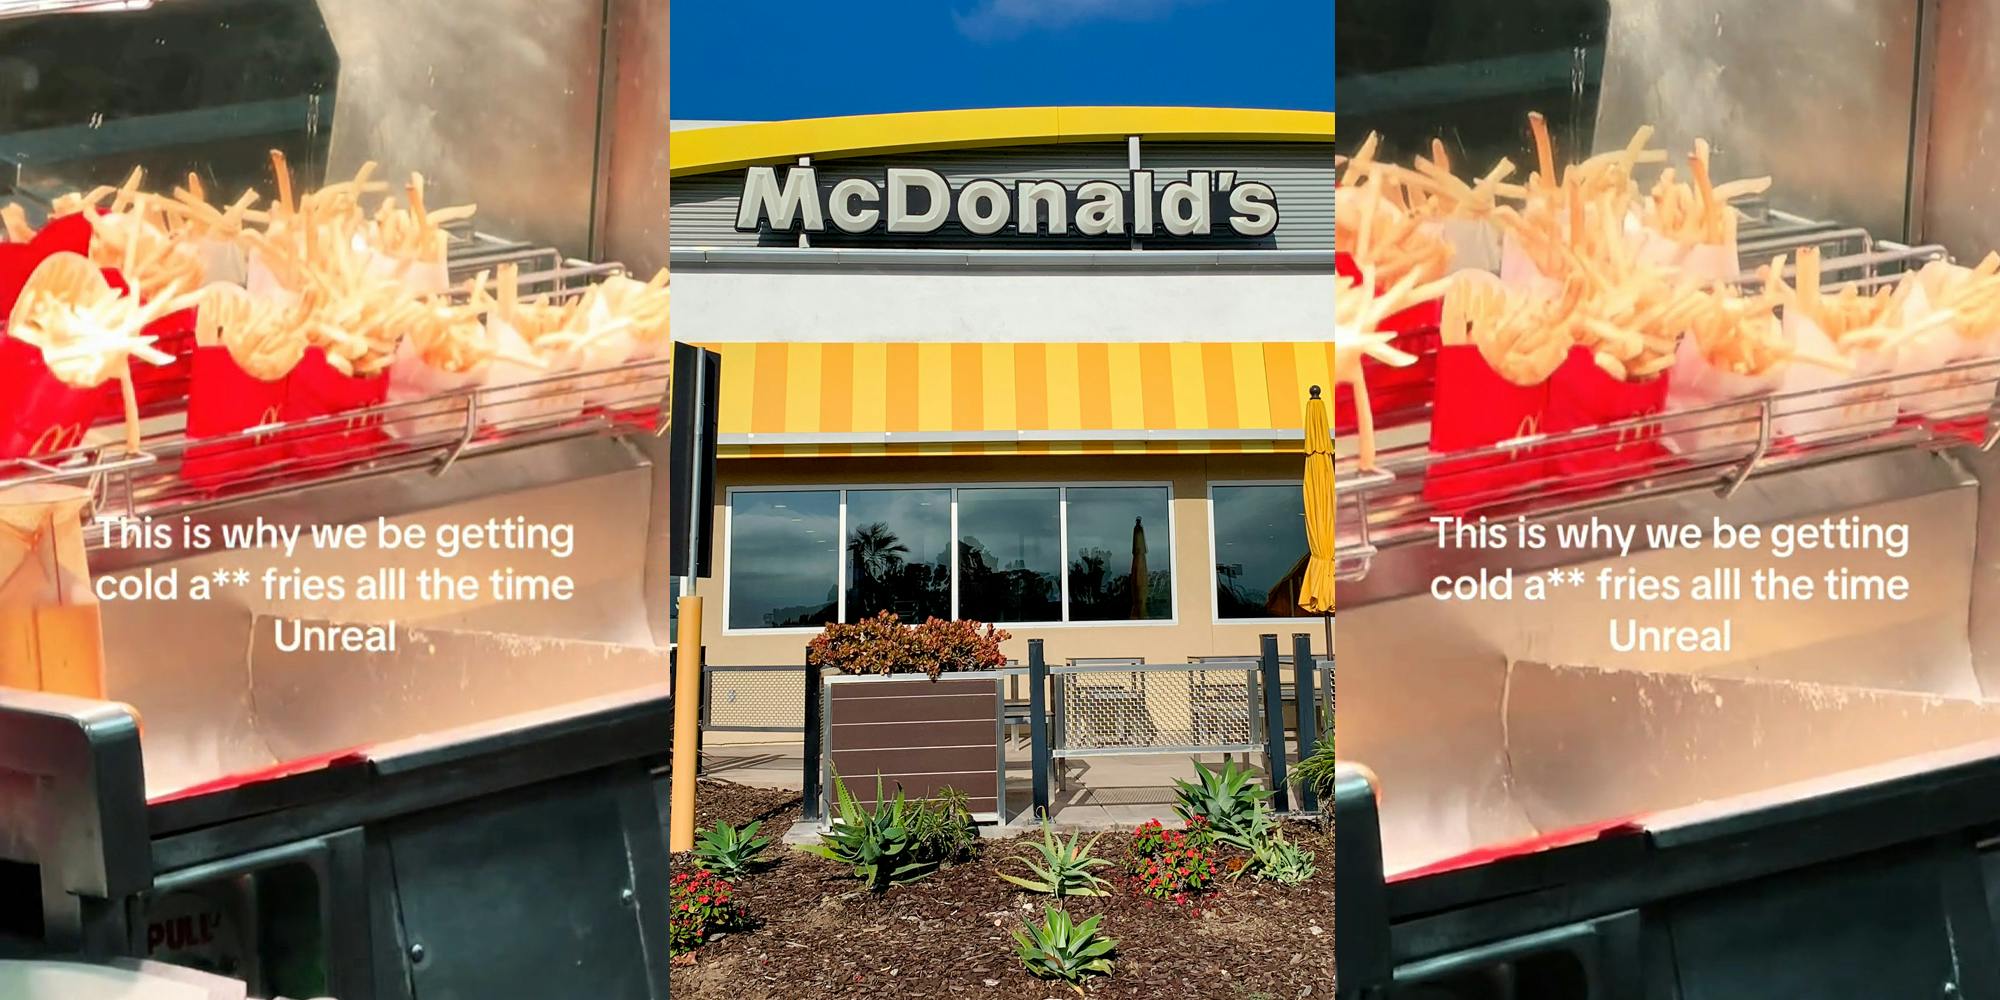 McDonald's fry station with fries in containers with caption "This is why we be getting cold a** fries all the time Unreal" (l) McDonald's building with sign (c) McDonald's fry station with fries in containers with caption "This is why we be getting cold a** fries all the time Unreal" (r)